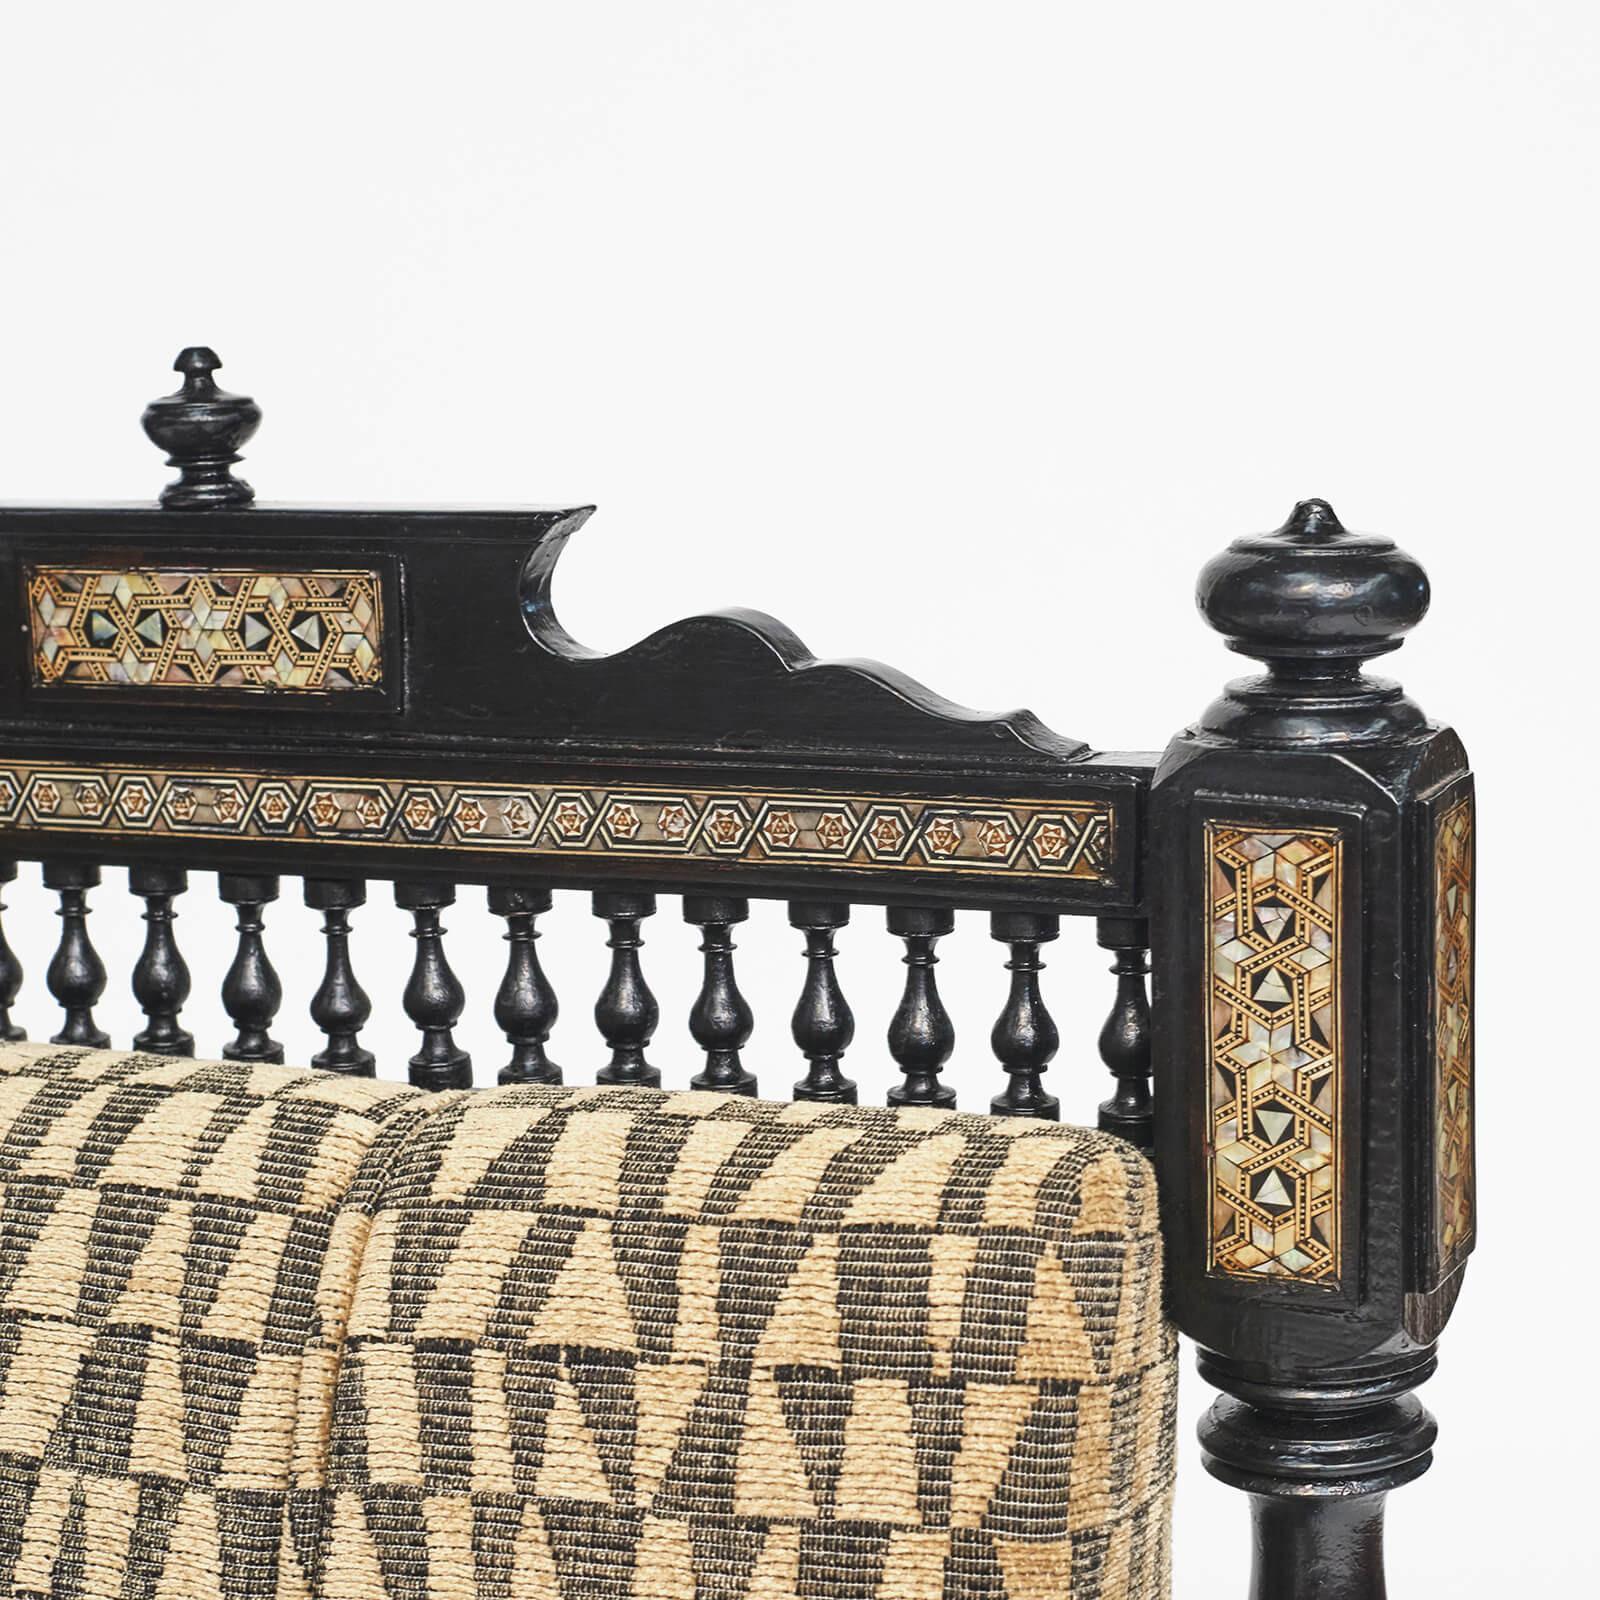 A Moroccan ebonized,  bone and semi precious stones armchair
Approx. 1900. 
Upholstered drop-in seat and back cushion, turned back supports and legs, lattice style carved arm panels.

New upholstery Fabric from  Larsen.